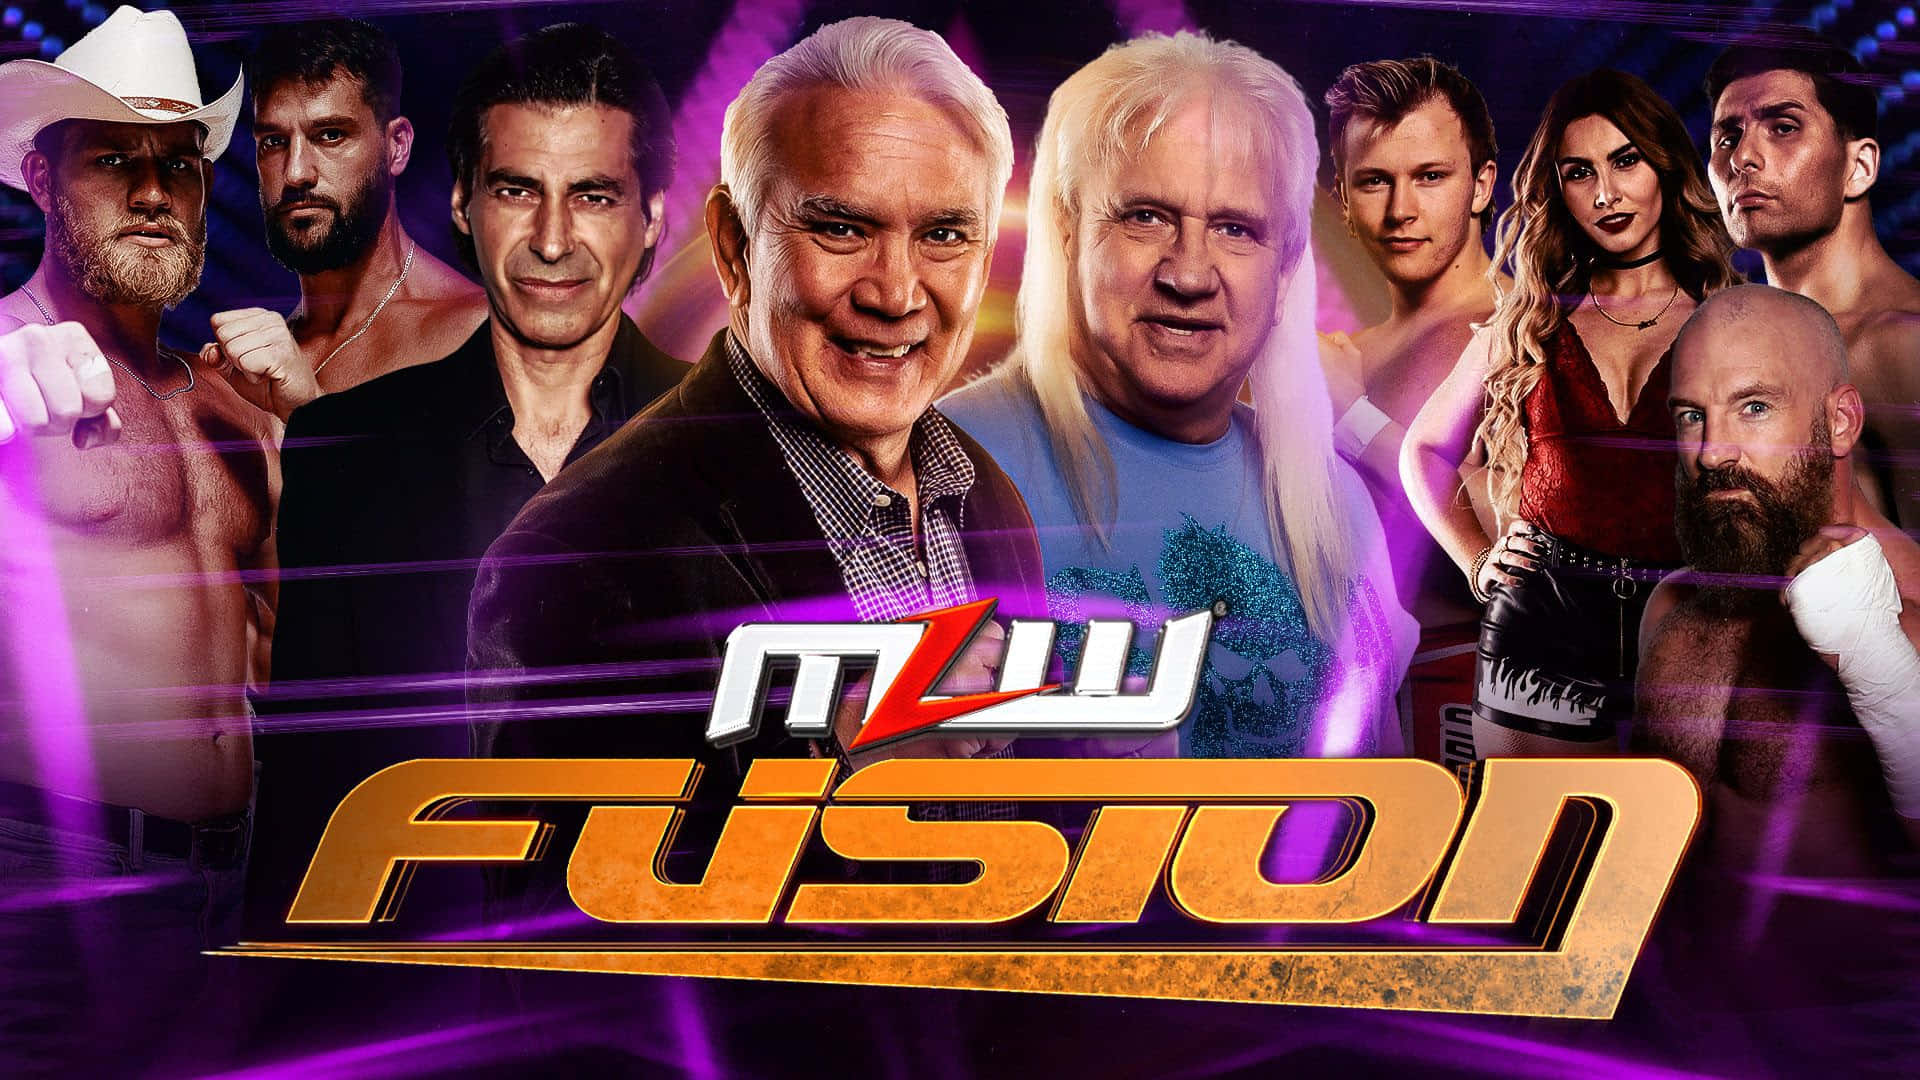 Ricky Steamboat Mlw Fusion Wrestling Promotions. Wallpaper